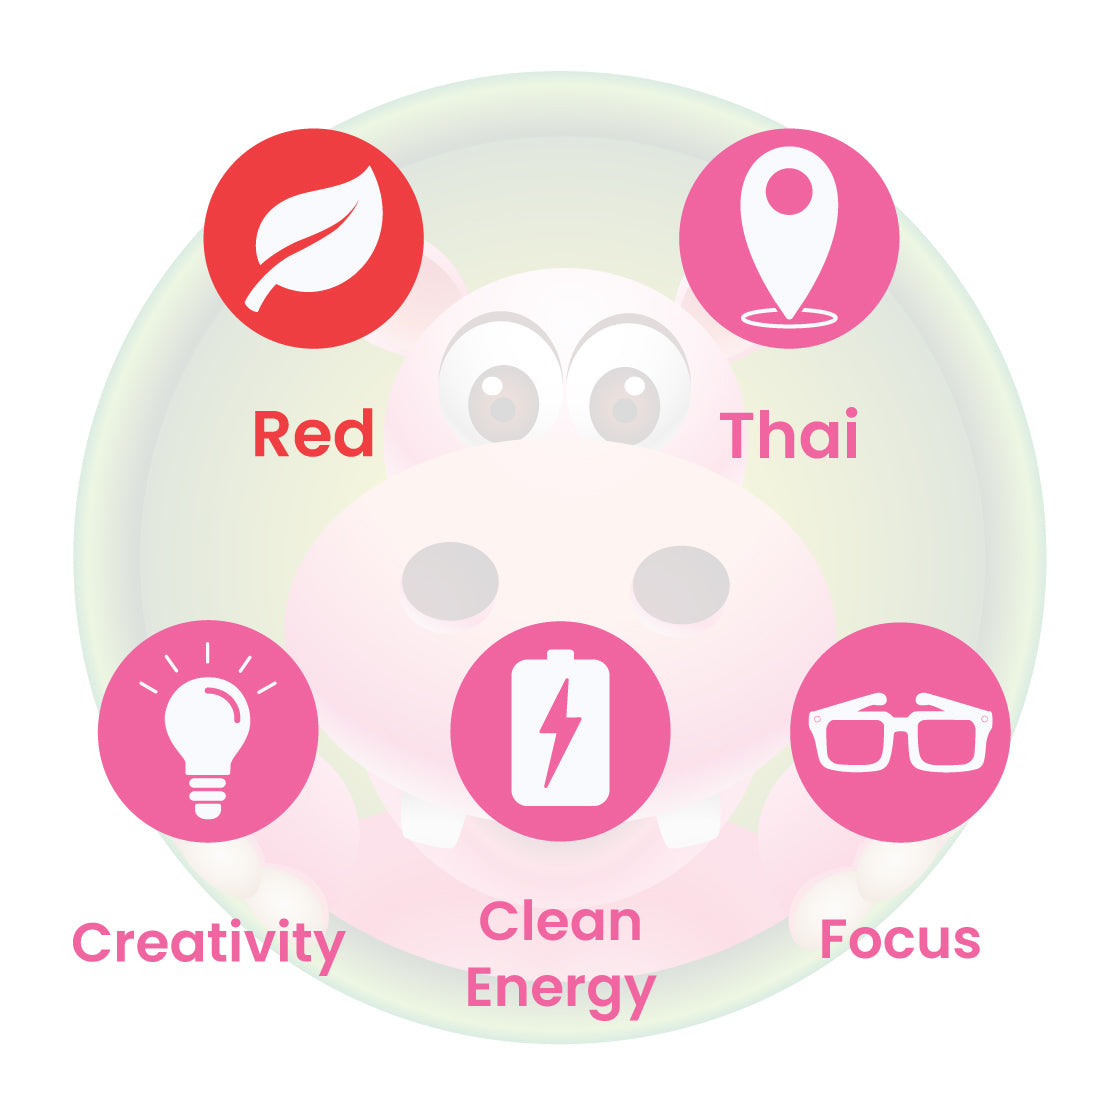 Infographic Details for Happy Hippo Red Vein Thai Kratom Powder. Leaf color: Red Vein. Kratom Strain Origin: Thai. Kratom Effects resonate with Increased Creativity, Clean Energy, and Focus.